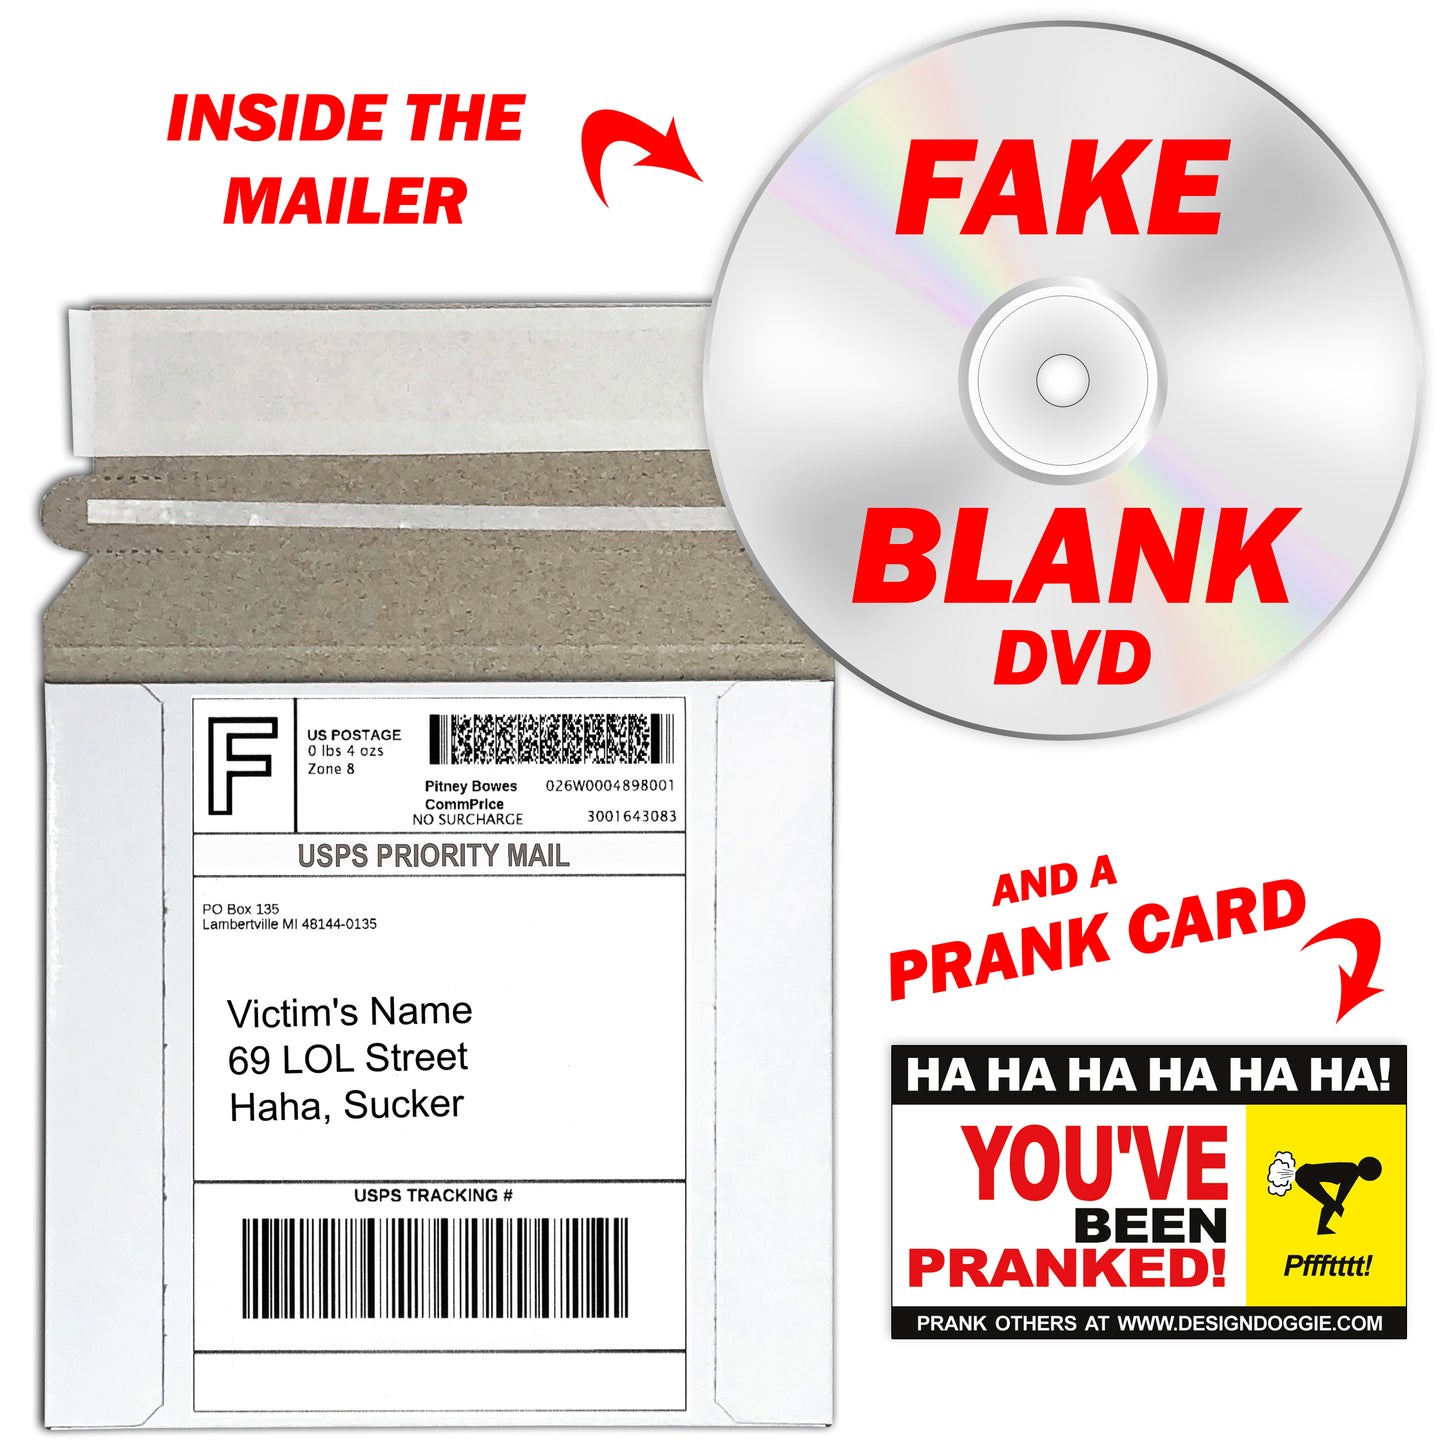 Nature's Dik Pix Fake DVD mail prank gets sent directly to your victims 100% anonymously!